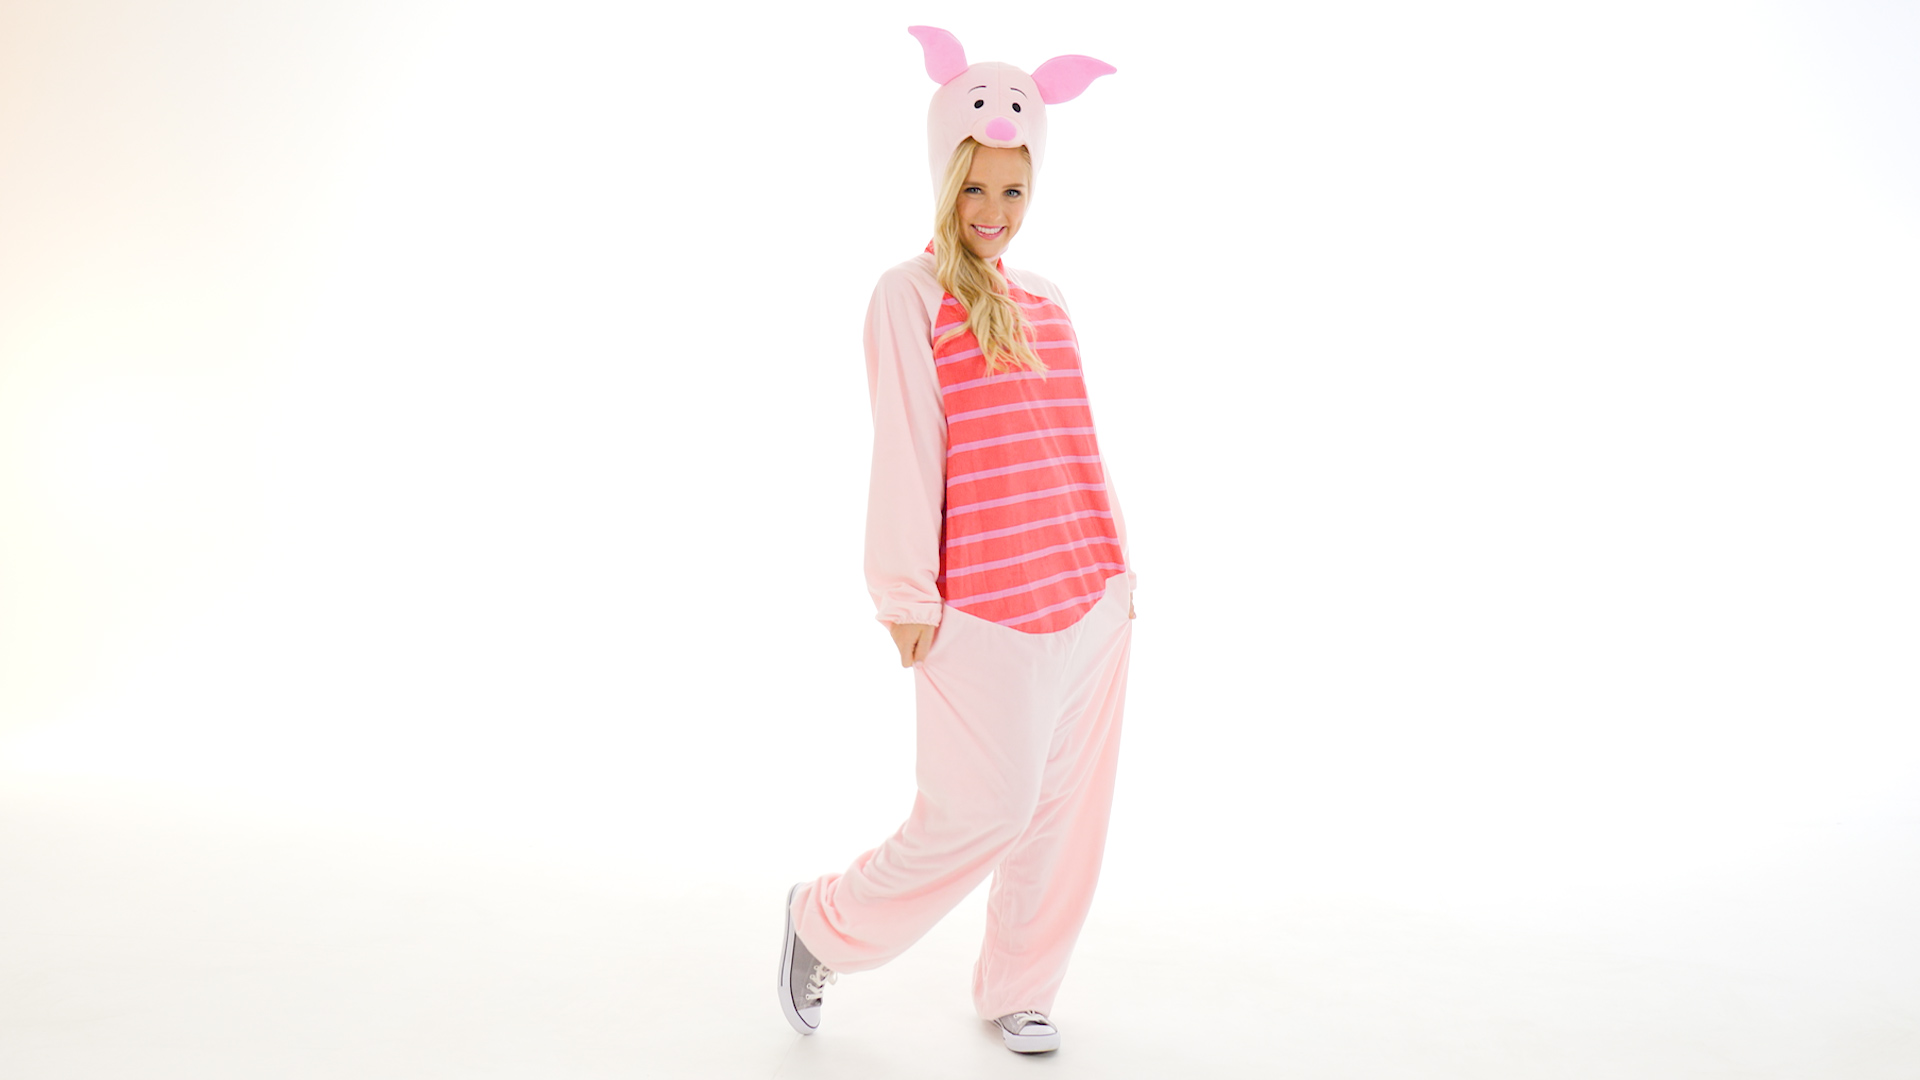 Be transformed in to the gallant and lovable Piglet this Halloween in this Winnie the Pooh Piglet Deluxe Adult Costume.